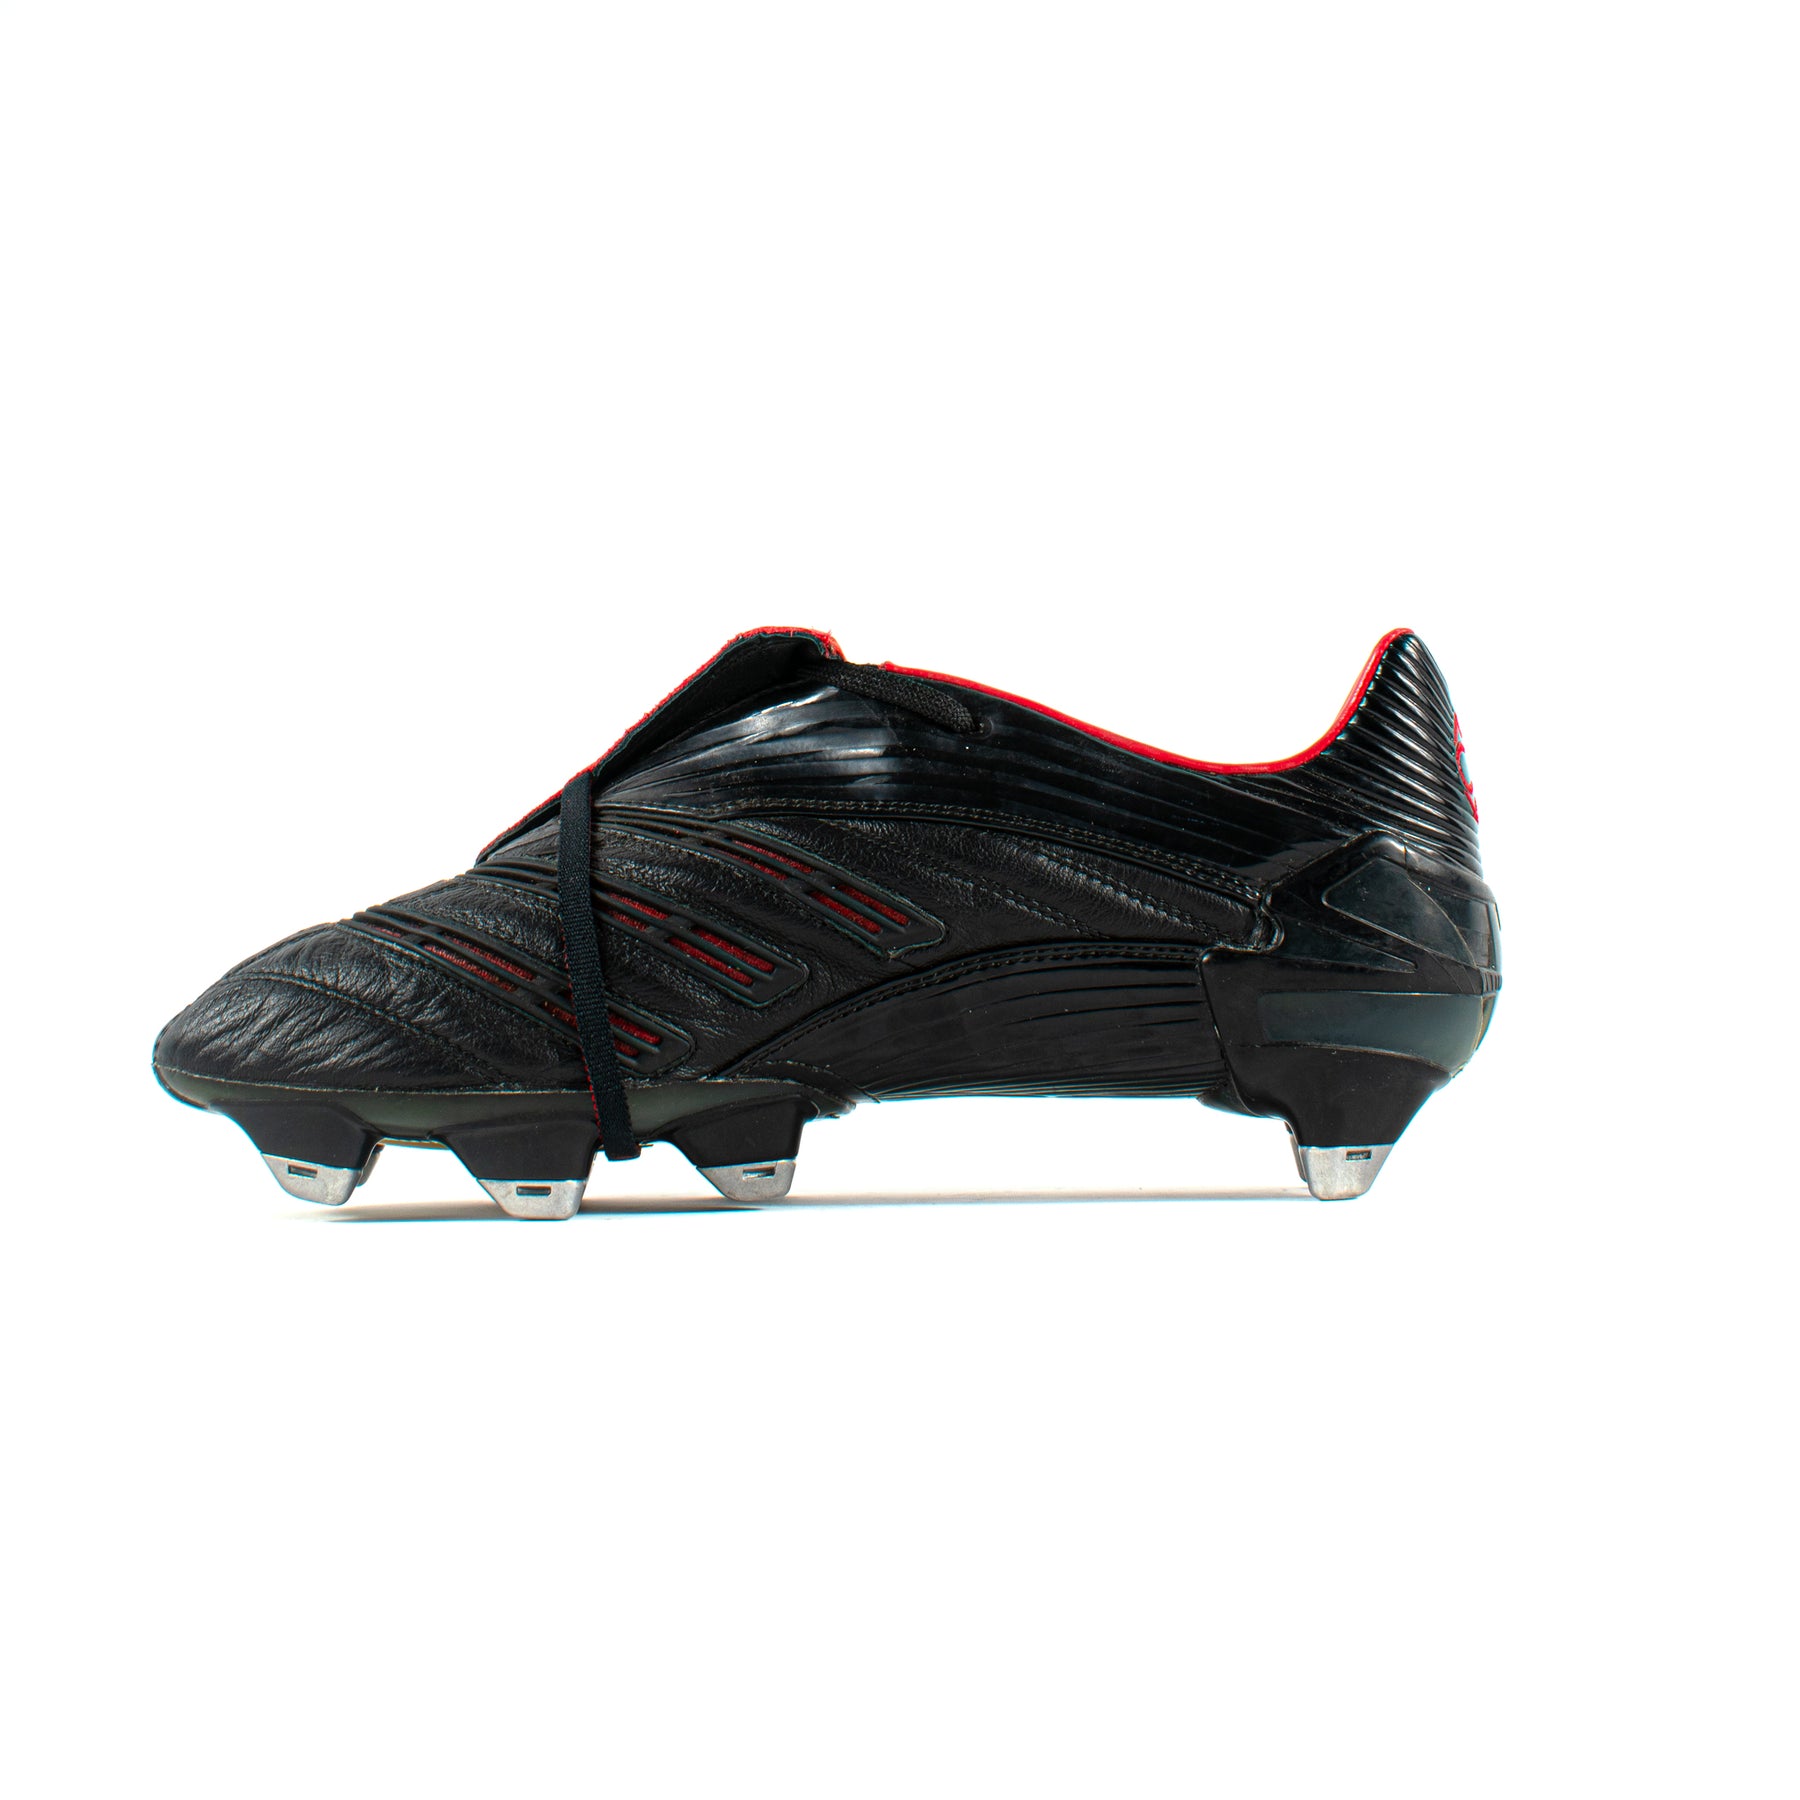 Adidas Predator Absolute / Classic – Soccer Cleats